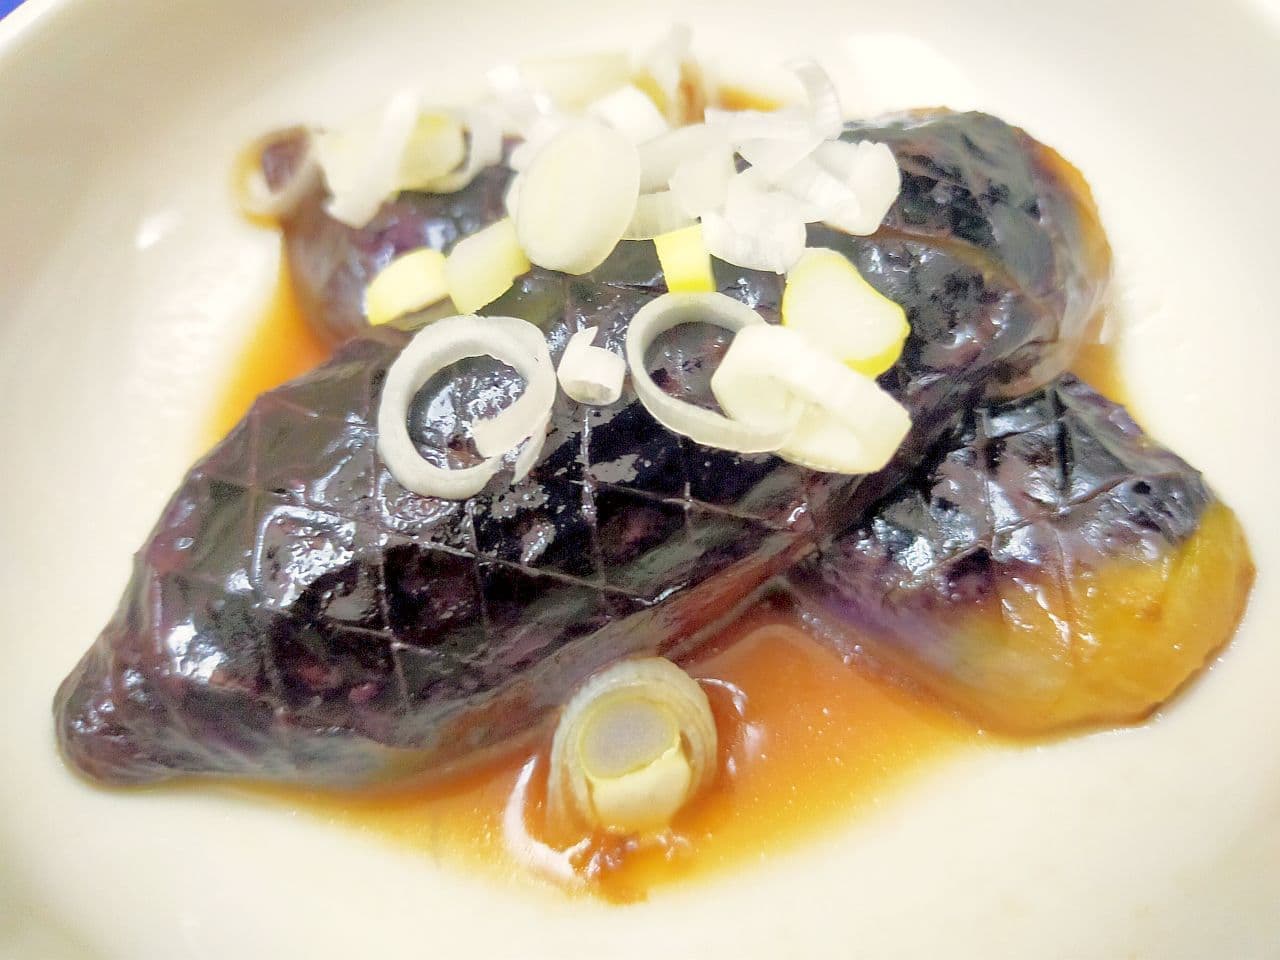 Recipe for "Grilled eggplant with soy sauce" (Japanese only)